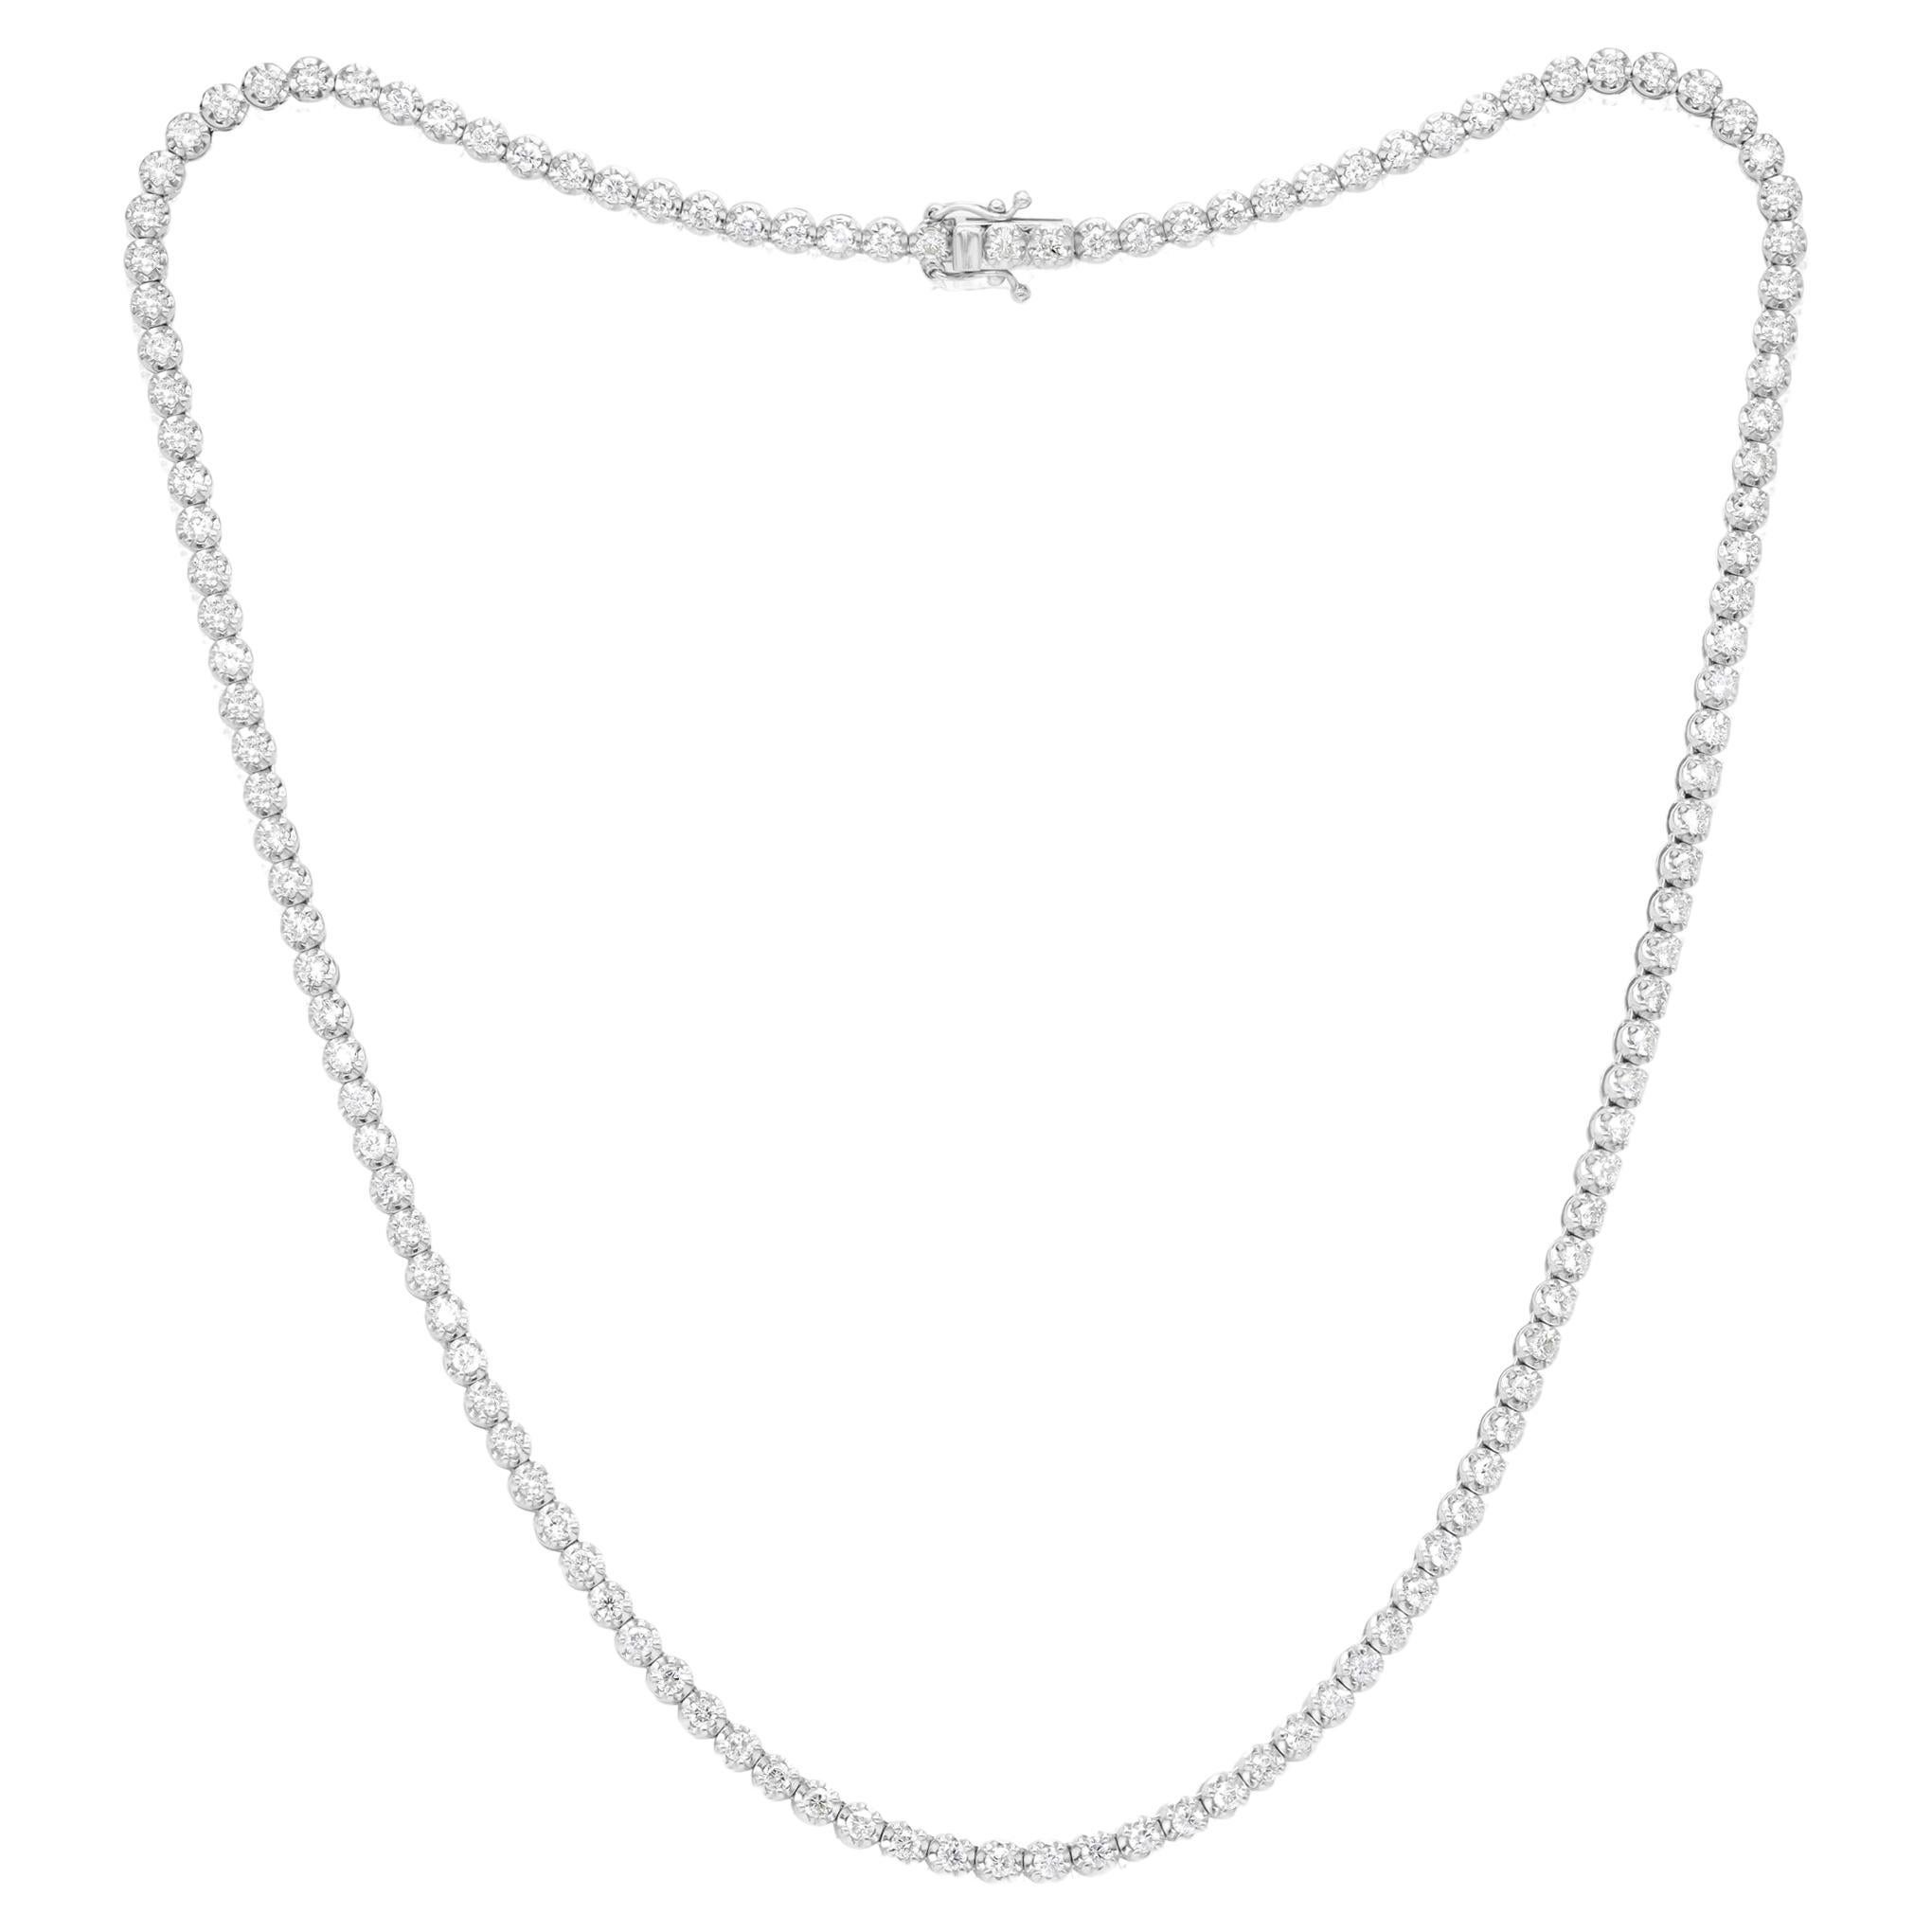 Diana M. 14 kt white gold, 17" 4 prong diamond tennis necklace featuring 4.00 ct For Sale